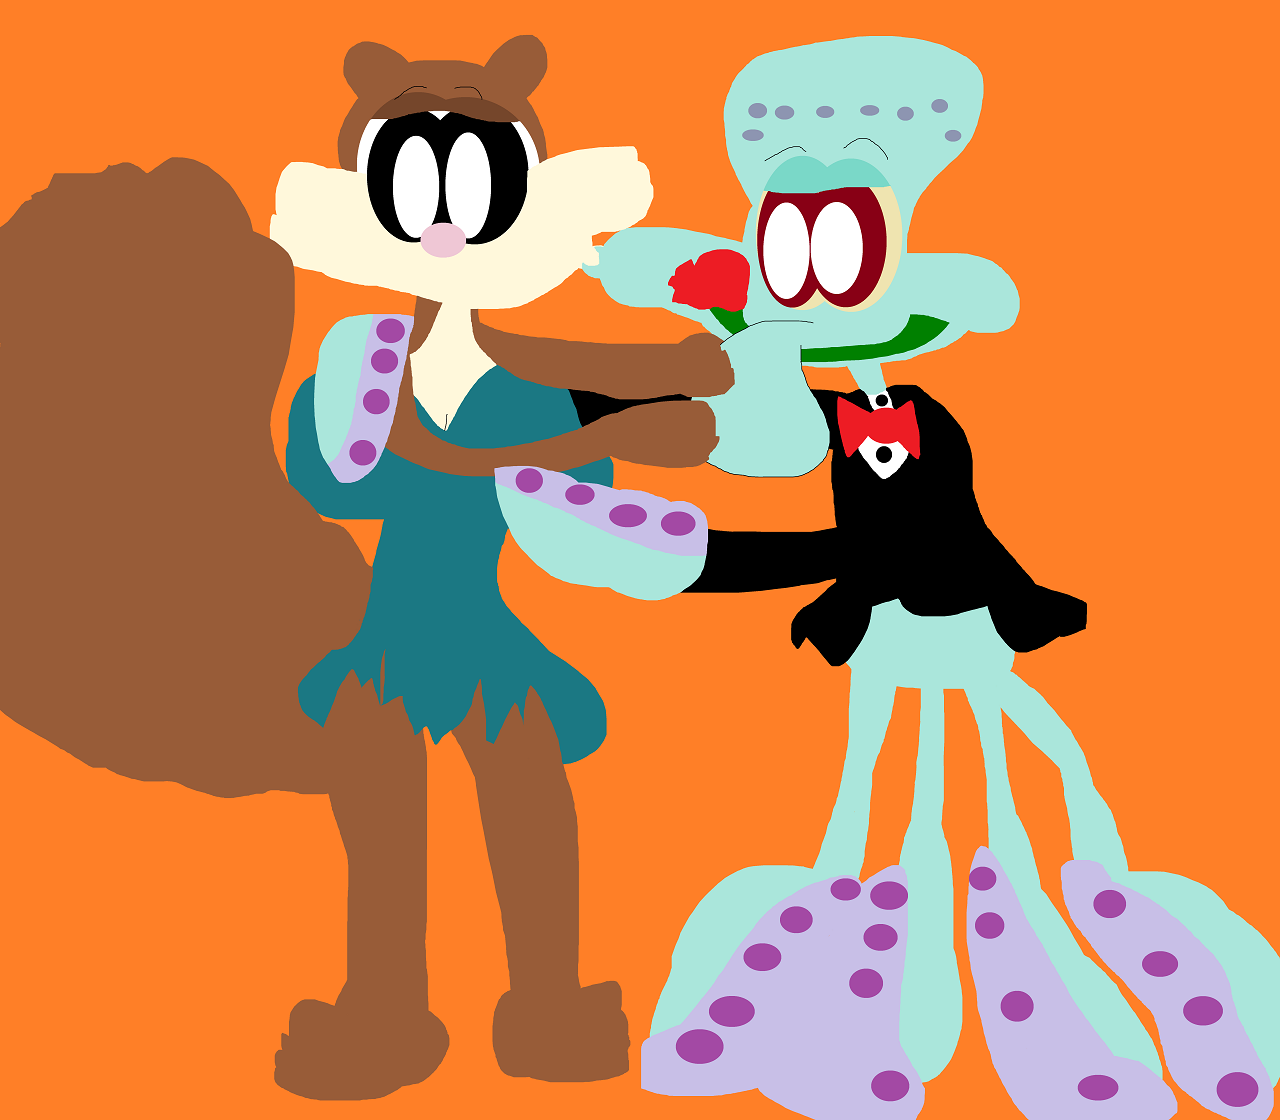 Squidward Dancing And Kissing Sandy+A Rose Under His Nose by Falconlobo